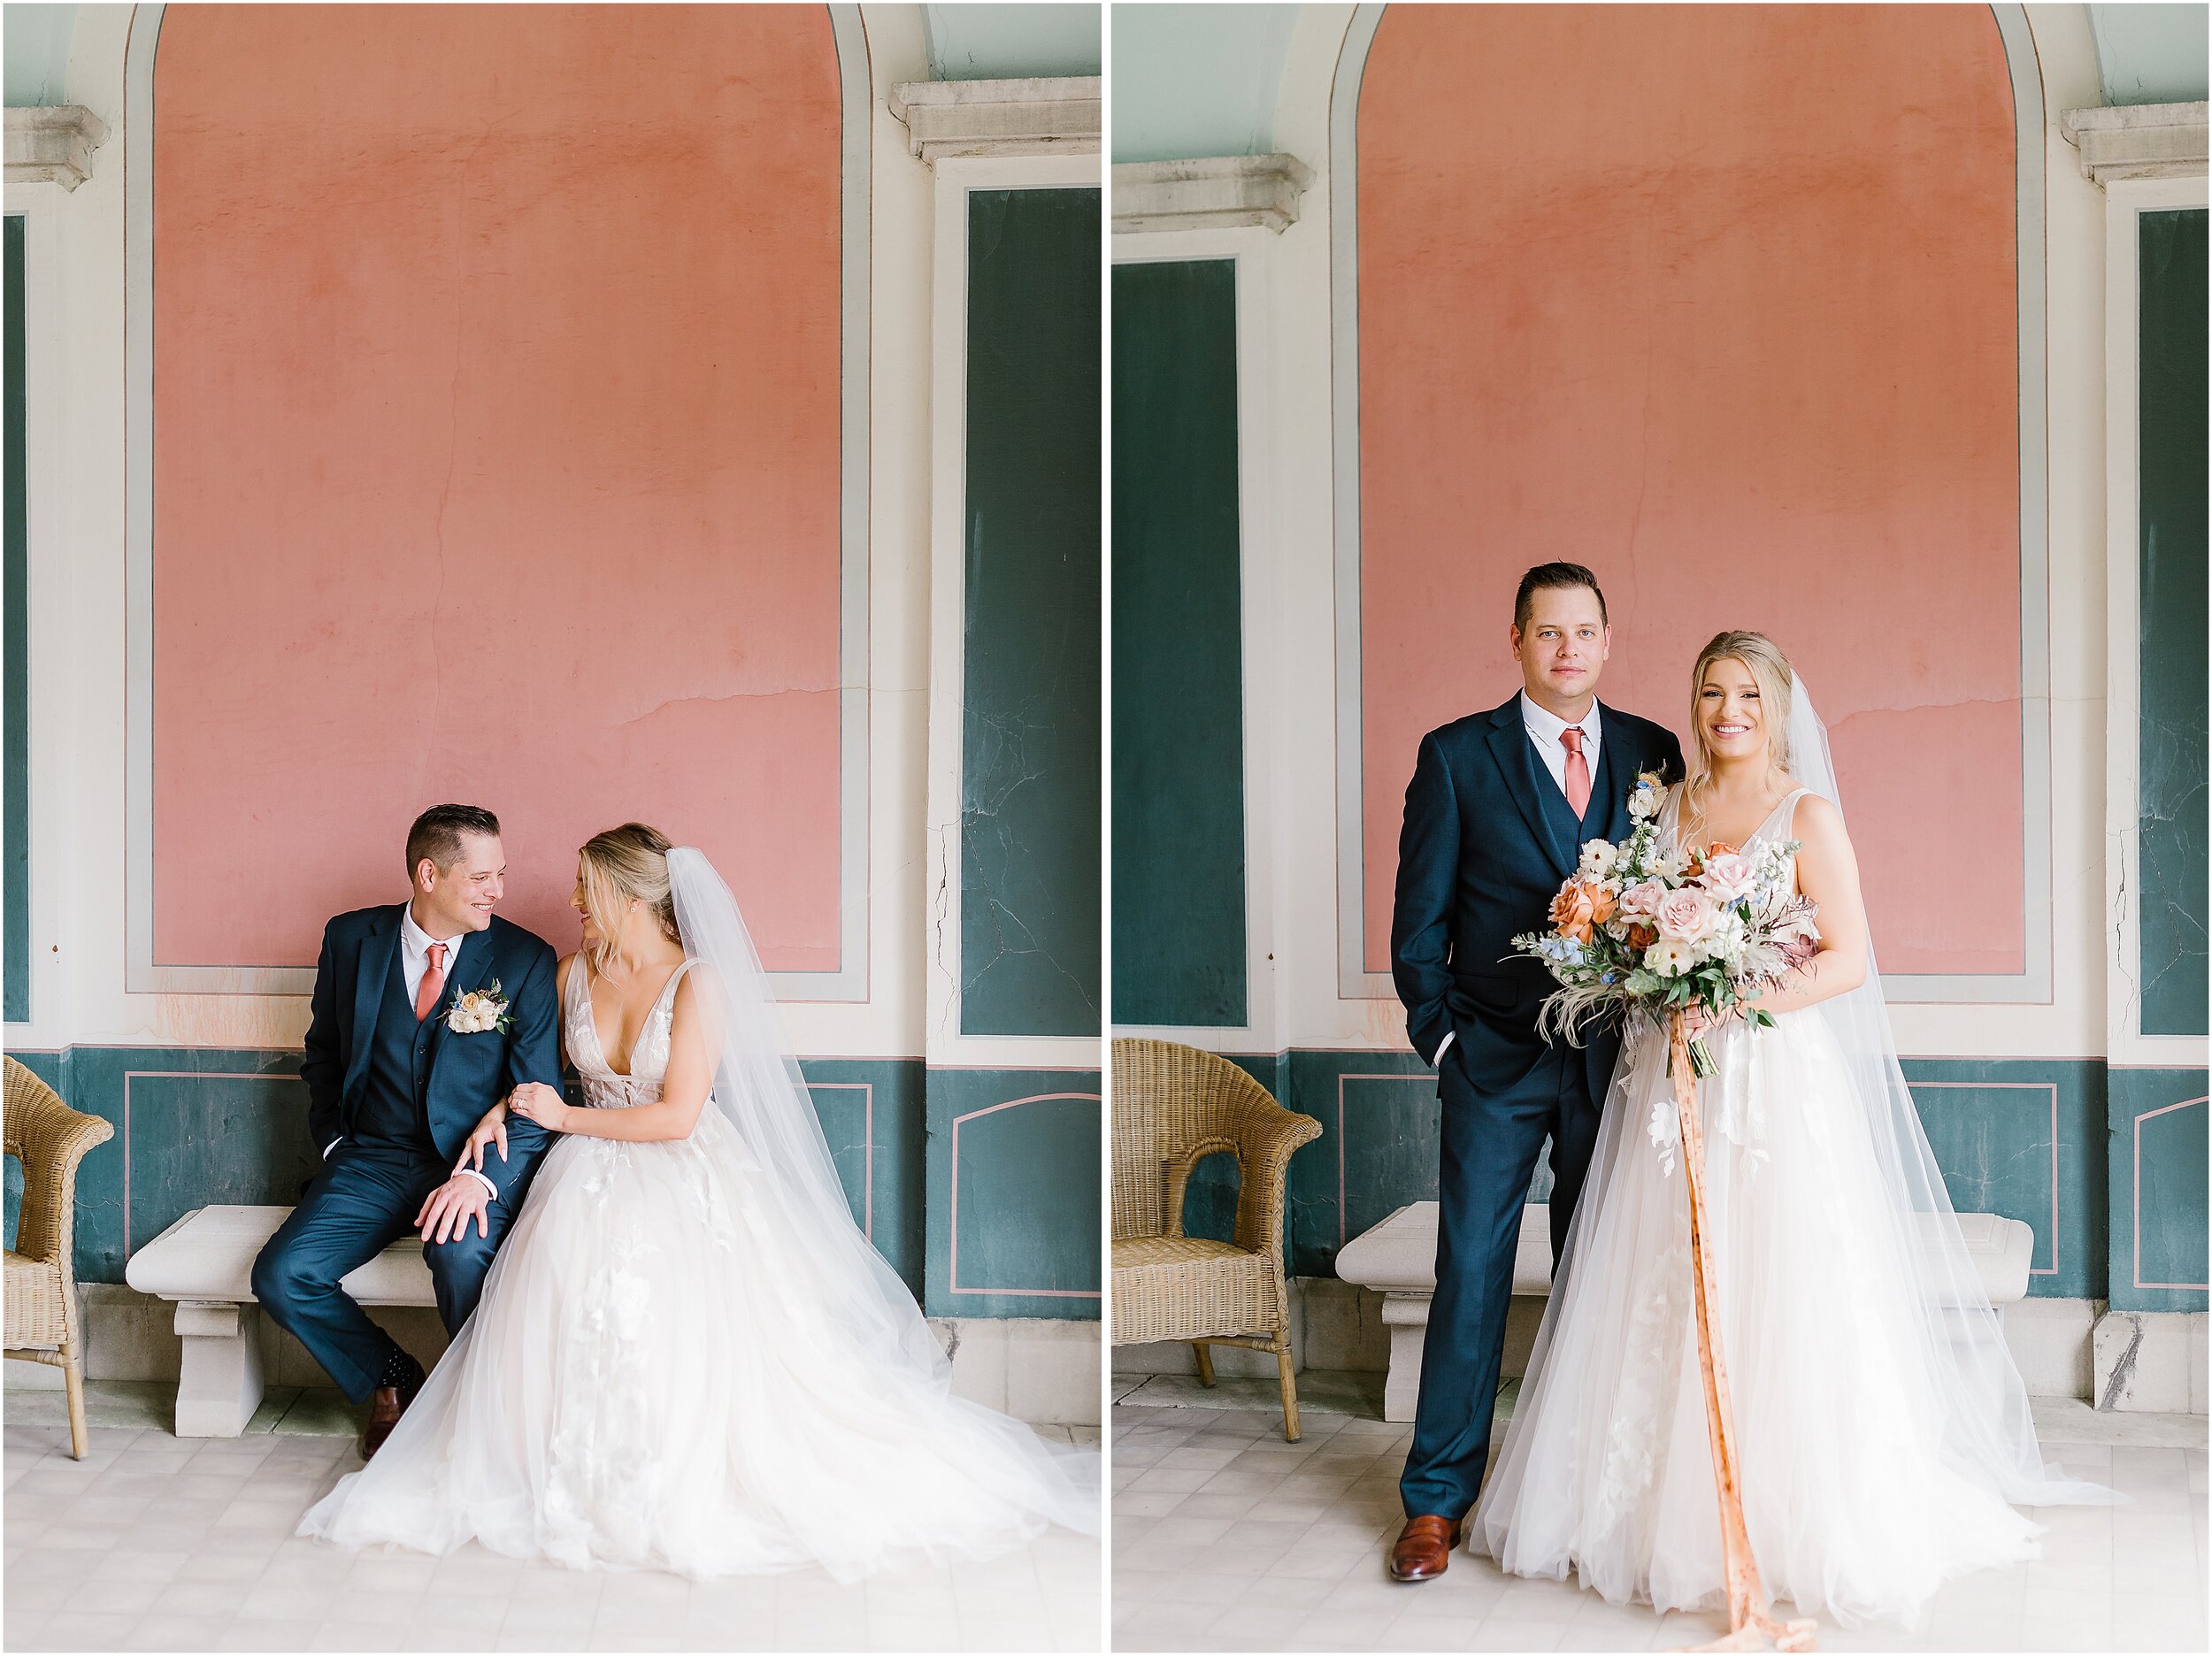 Rebecca Shehorn Photography Colleen and Kyle Inn at Irwin Gardens Wedding-383_The Commons Columbus Inn at Irwin Garden Indianapolis Wedding Photographer.jpg